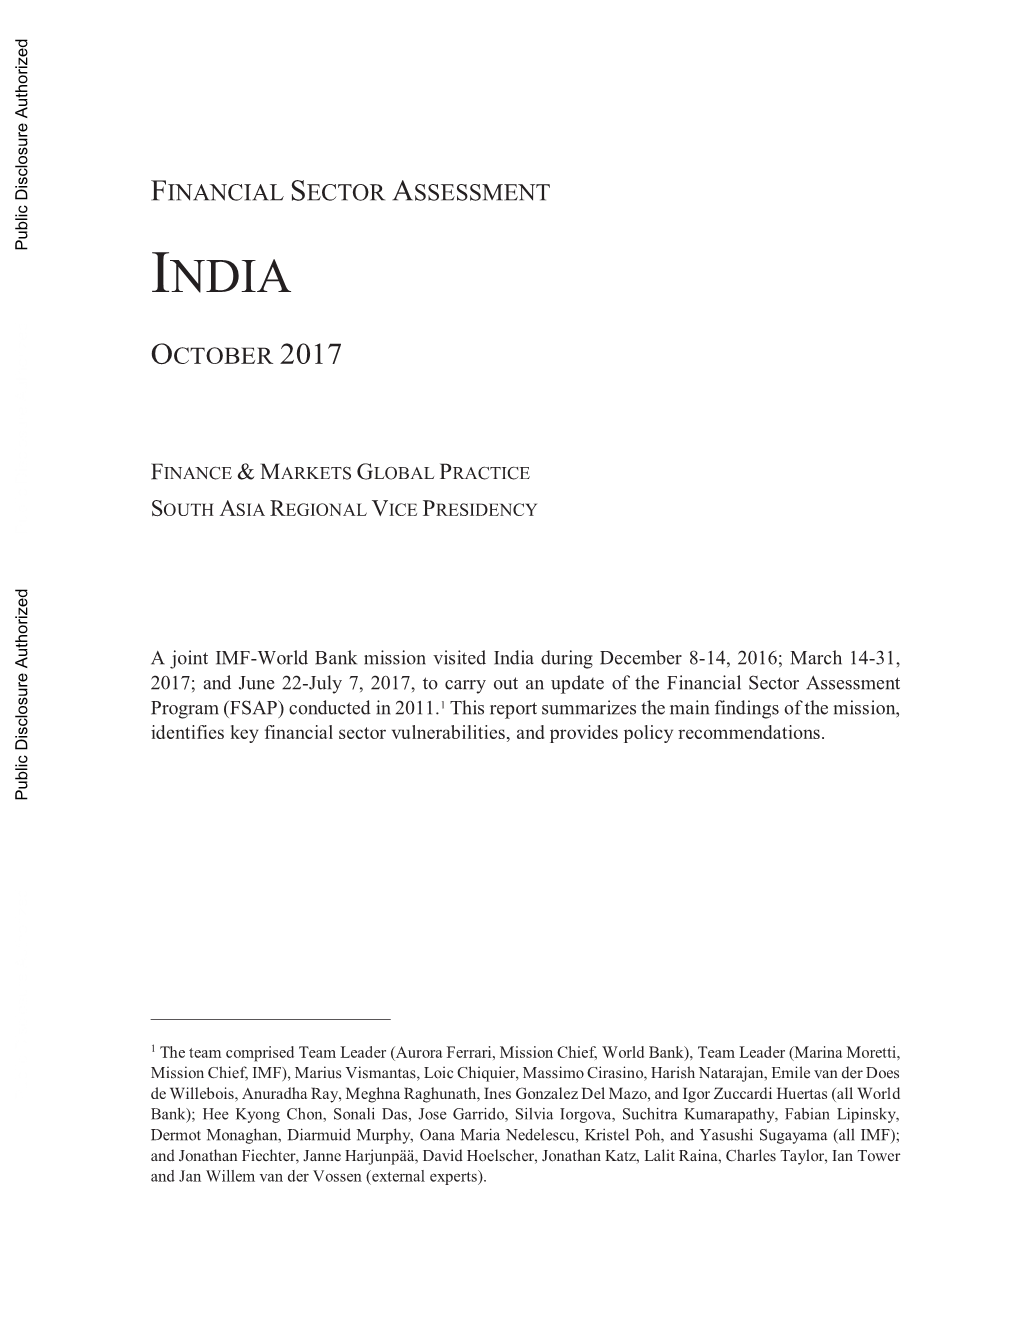 FINANCIAL SECTOR ASSESSMENT Public Disclosure Authorized INDIA